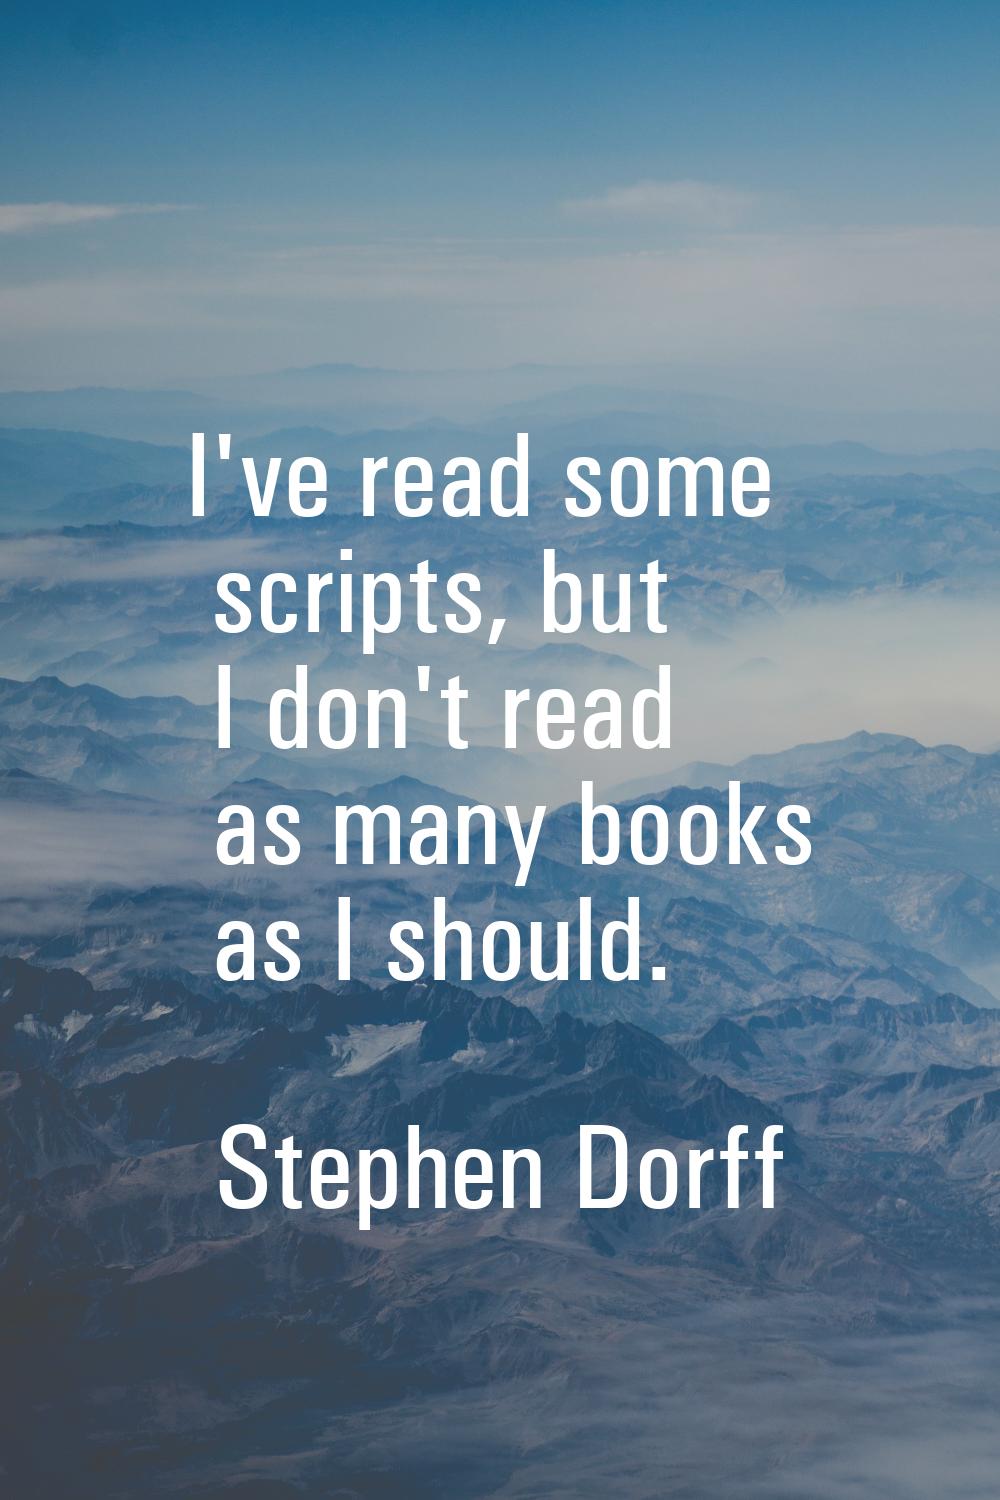 I've read some scripts, but I don't read as many books as I should.